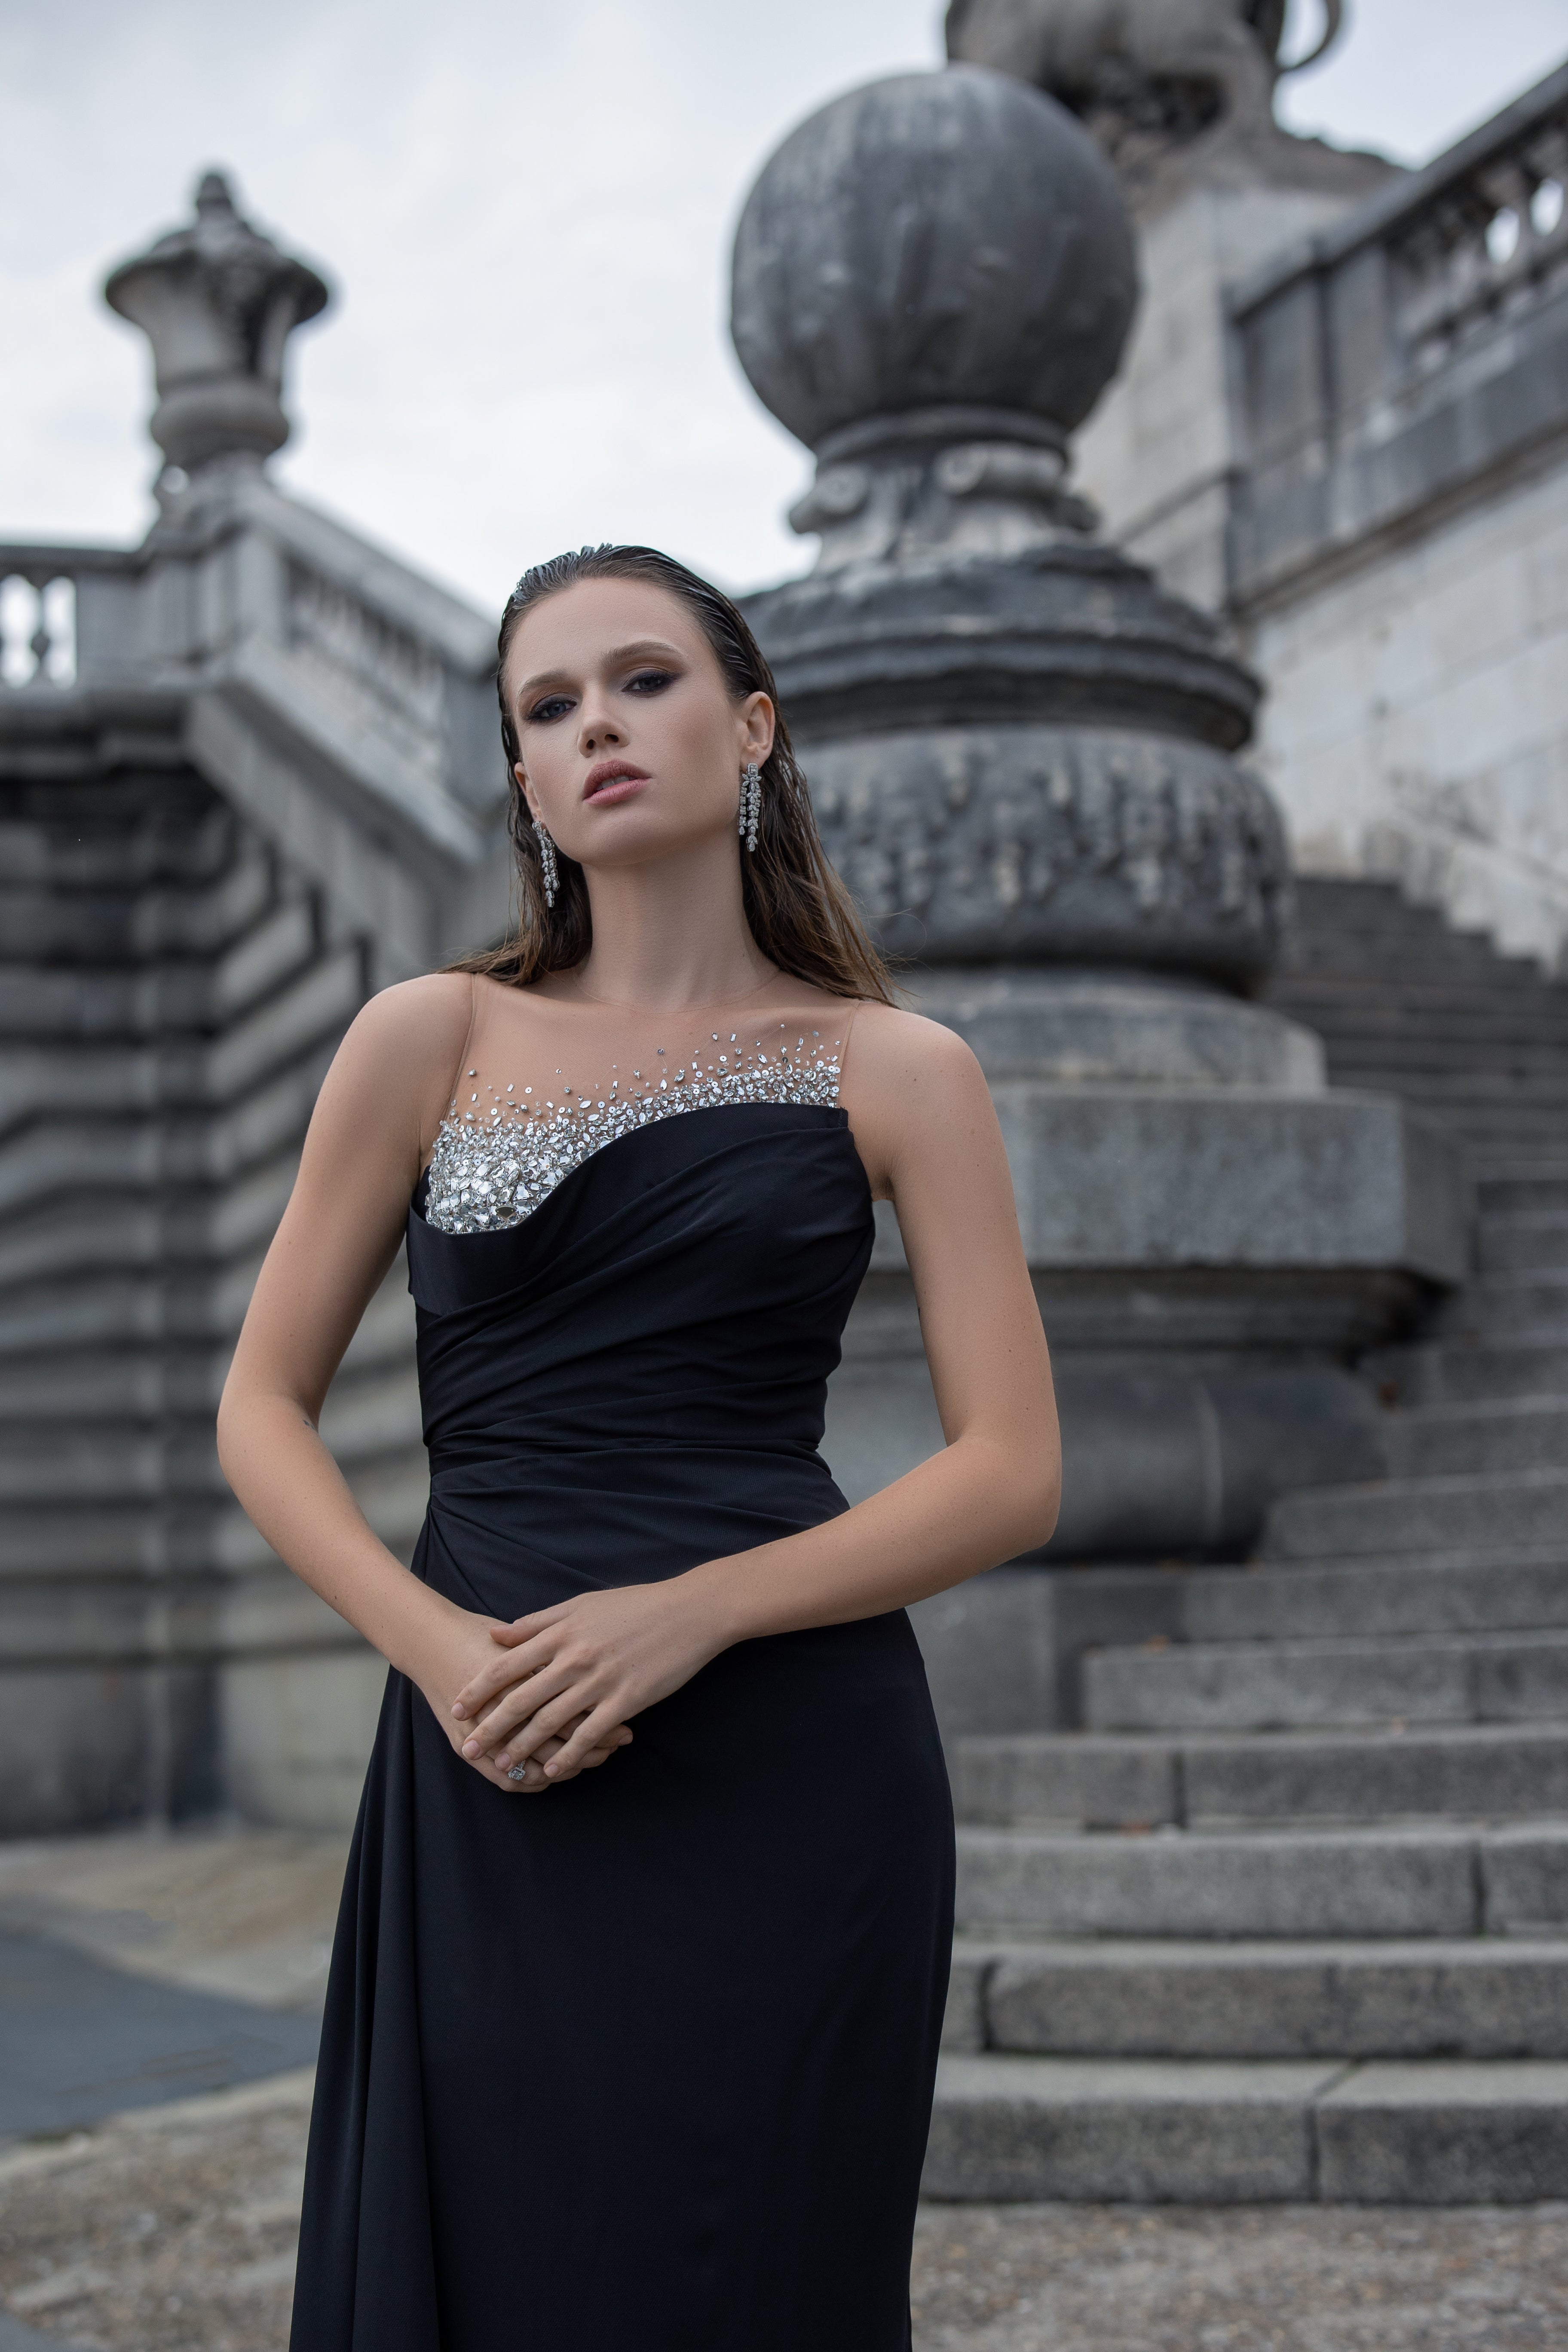 Classic black dress decorated at the chest with a shiny crystal stone